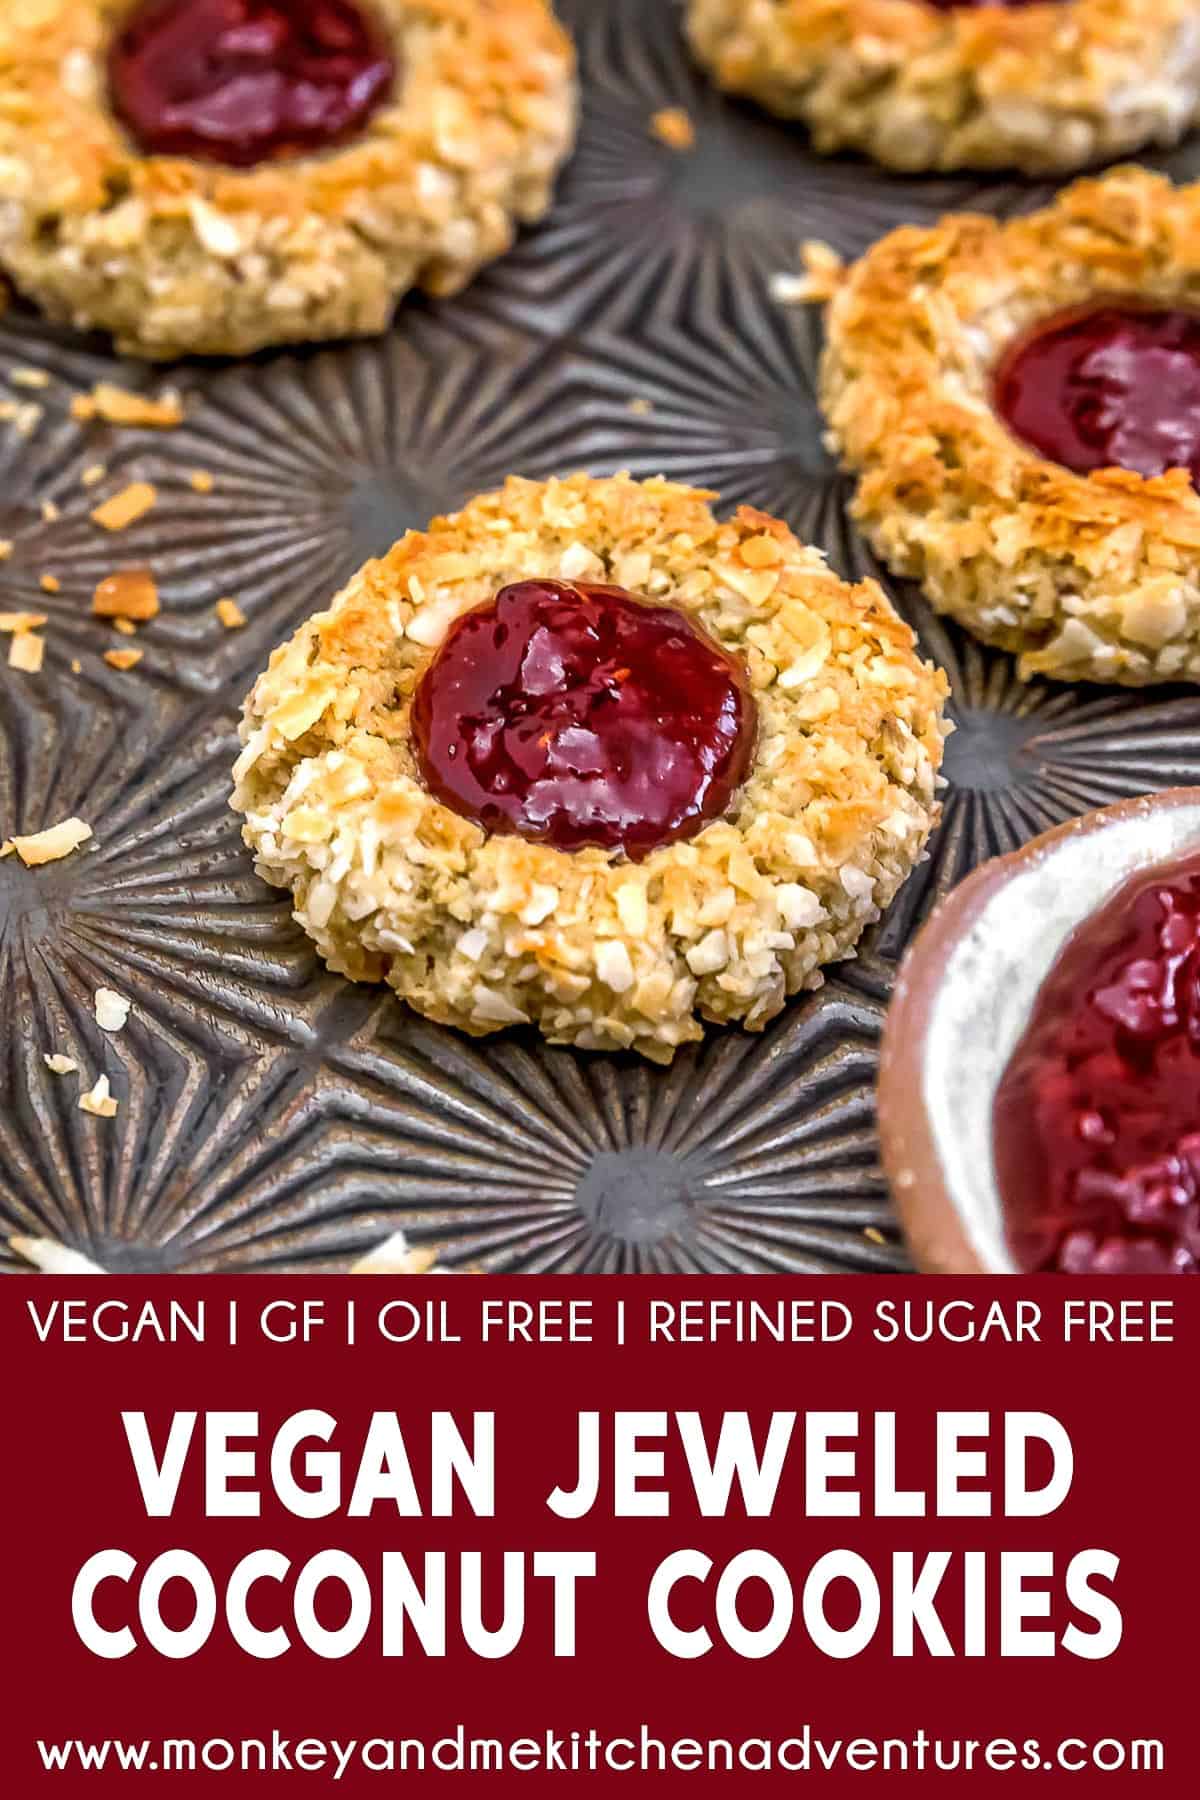 Vegan Jeweled Coconut Cookies with text description